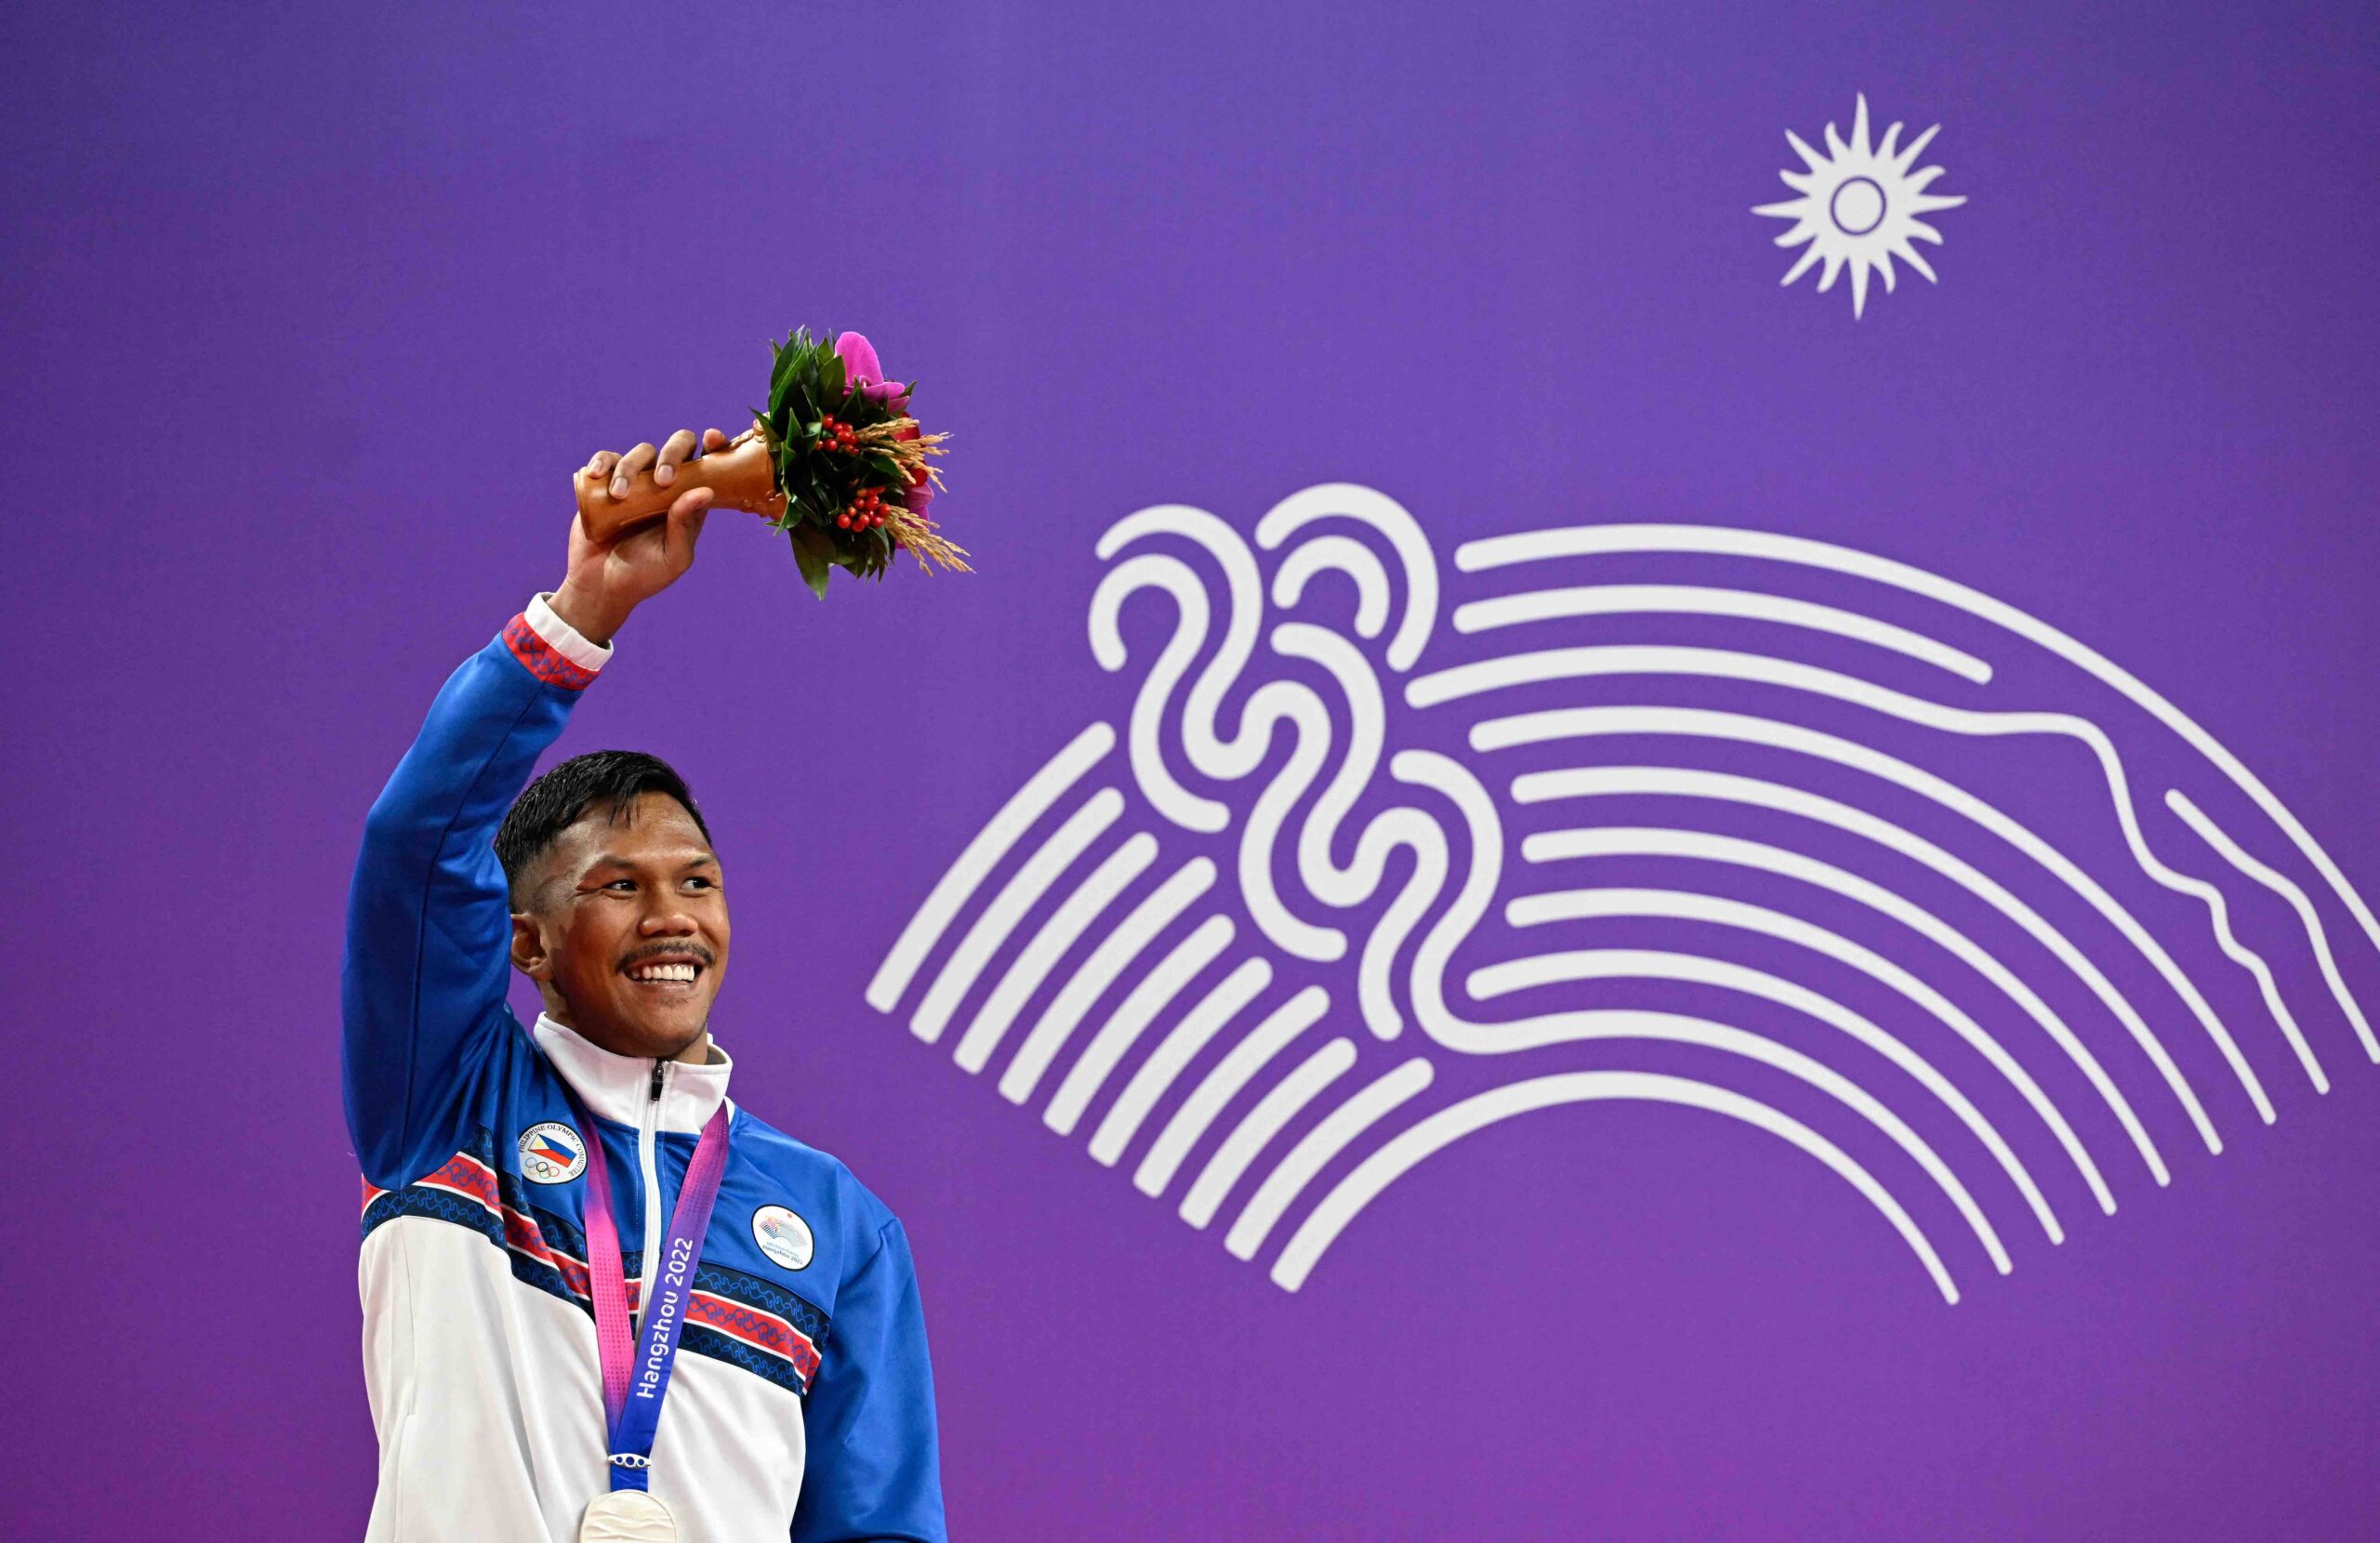 Eumir Marcial wins a silver medal at the 19th Asian Games